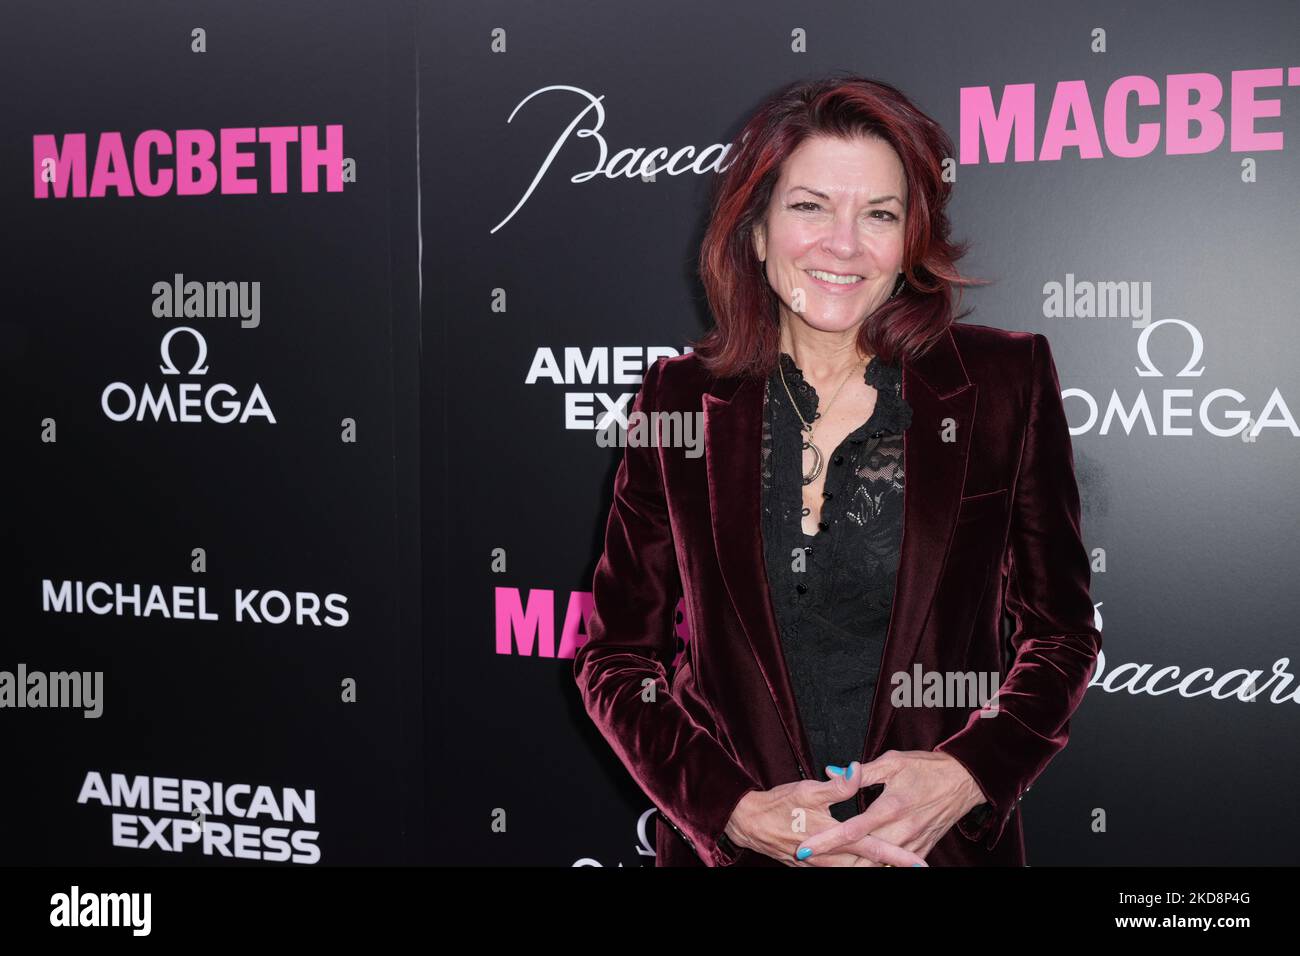 NEW YORK, NEW YORK - APRIL 28: Roxanne Cash pose at the opening night of 'MacBeth' on Broadway at The Longacre Theatre on April 28, 2022 in New York City. (Photo by John Nacion/NurPhoto) Stock Photo